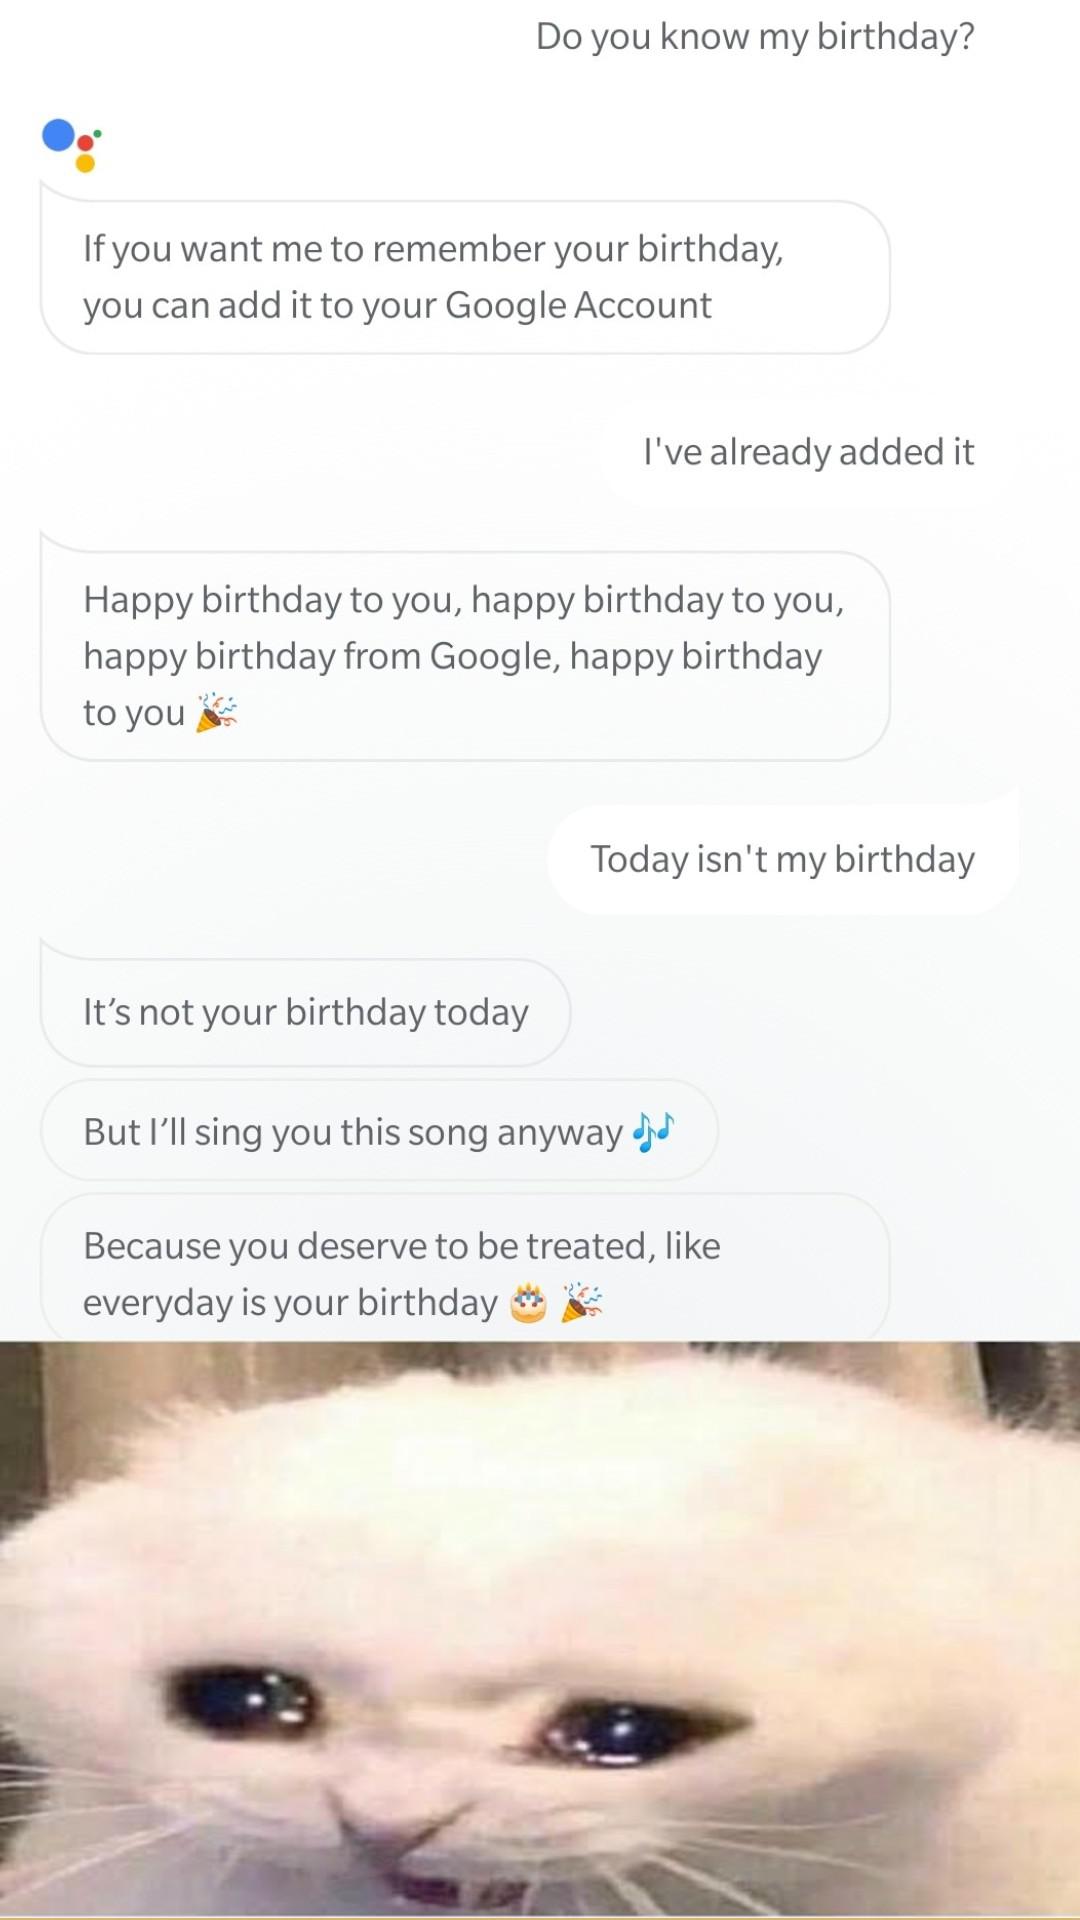 Dank, Google Assistant, Alexa, Siri other memes Dank, Google Assistant, Alexa, Siri text: Do you know my birthday? If you want me to remember your birthday, you can add it to your Google Account I 've already added it Happy birthday to you, happy birthday to you, happy birthday from Google, happy birthday to you Today isn't my birthday It's not your birthday today But I'll sing you this song anyway Because you deserve to be treated, like everyday is your birthday 